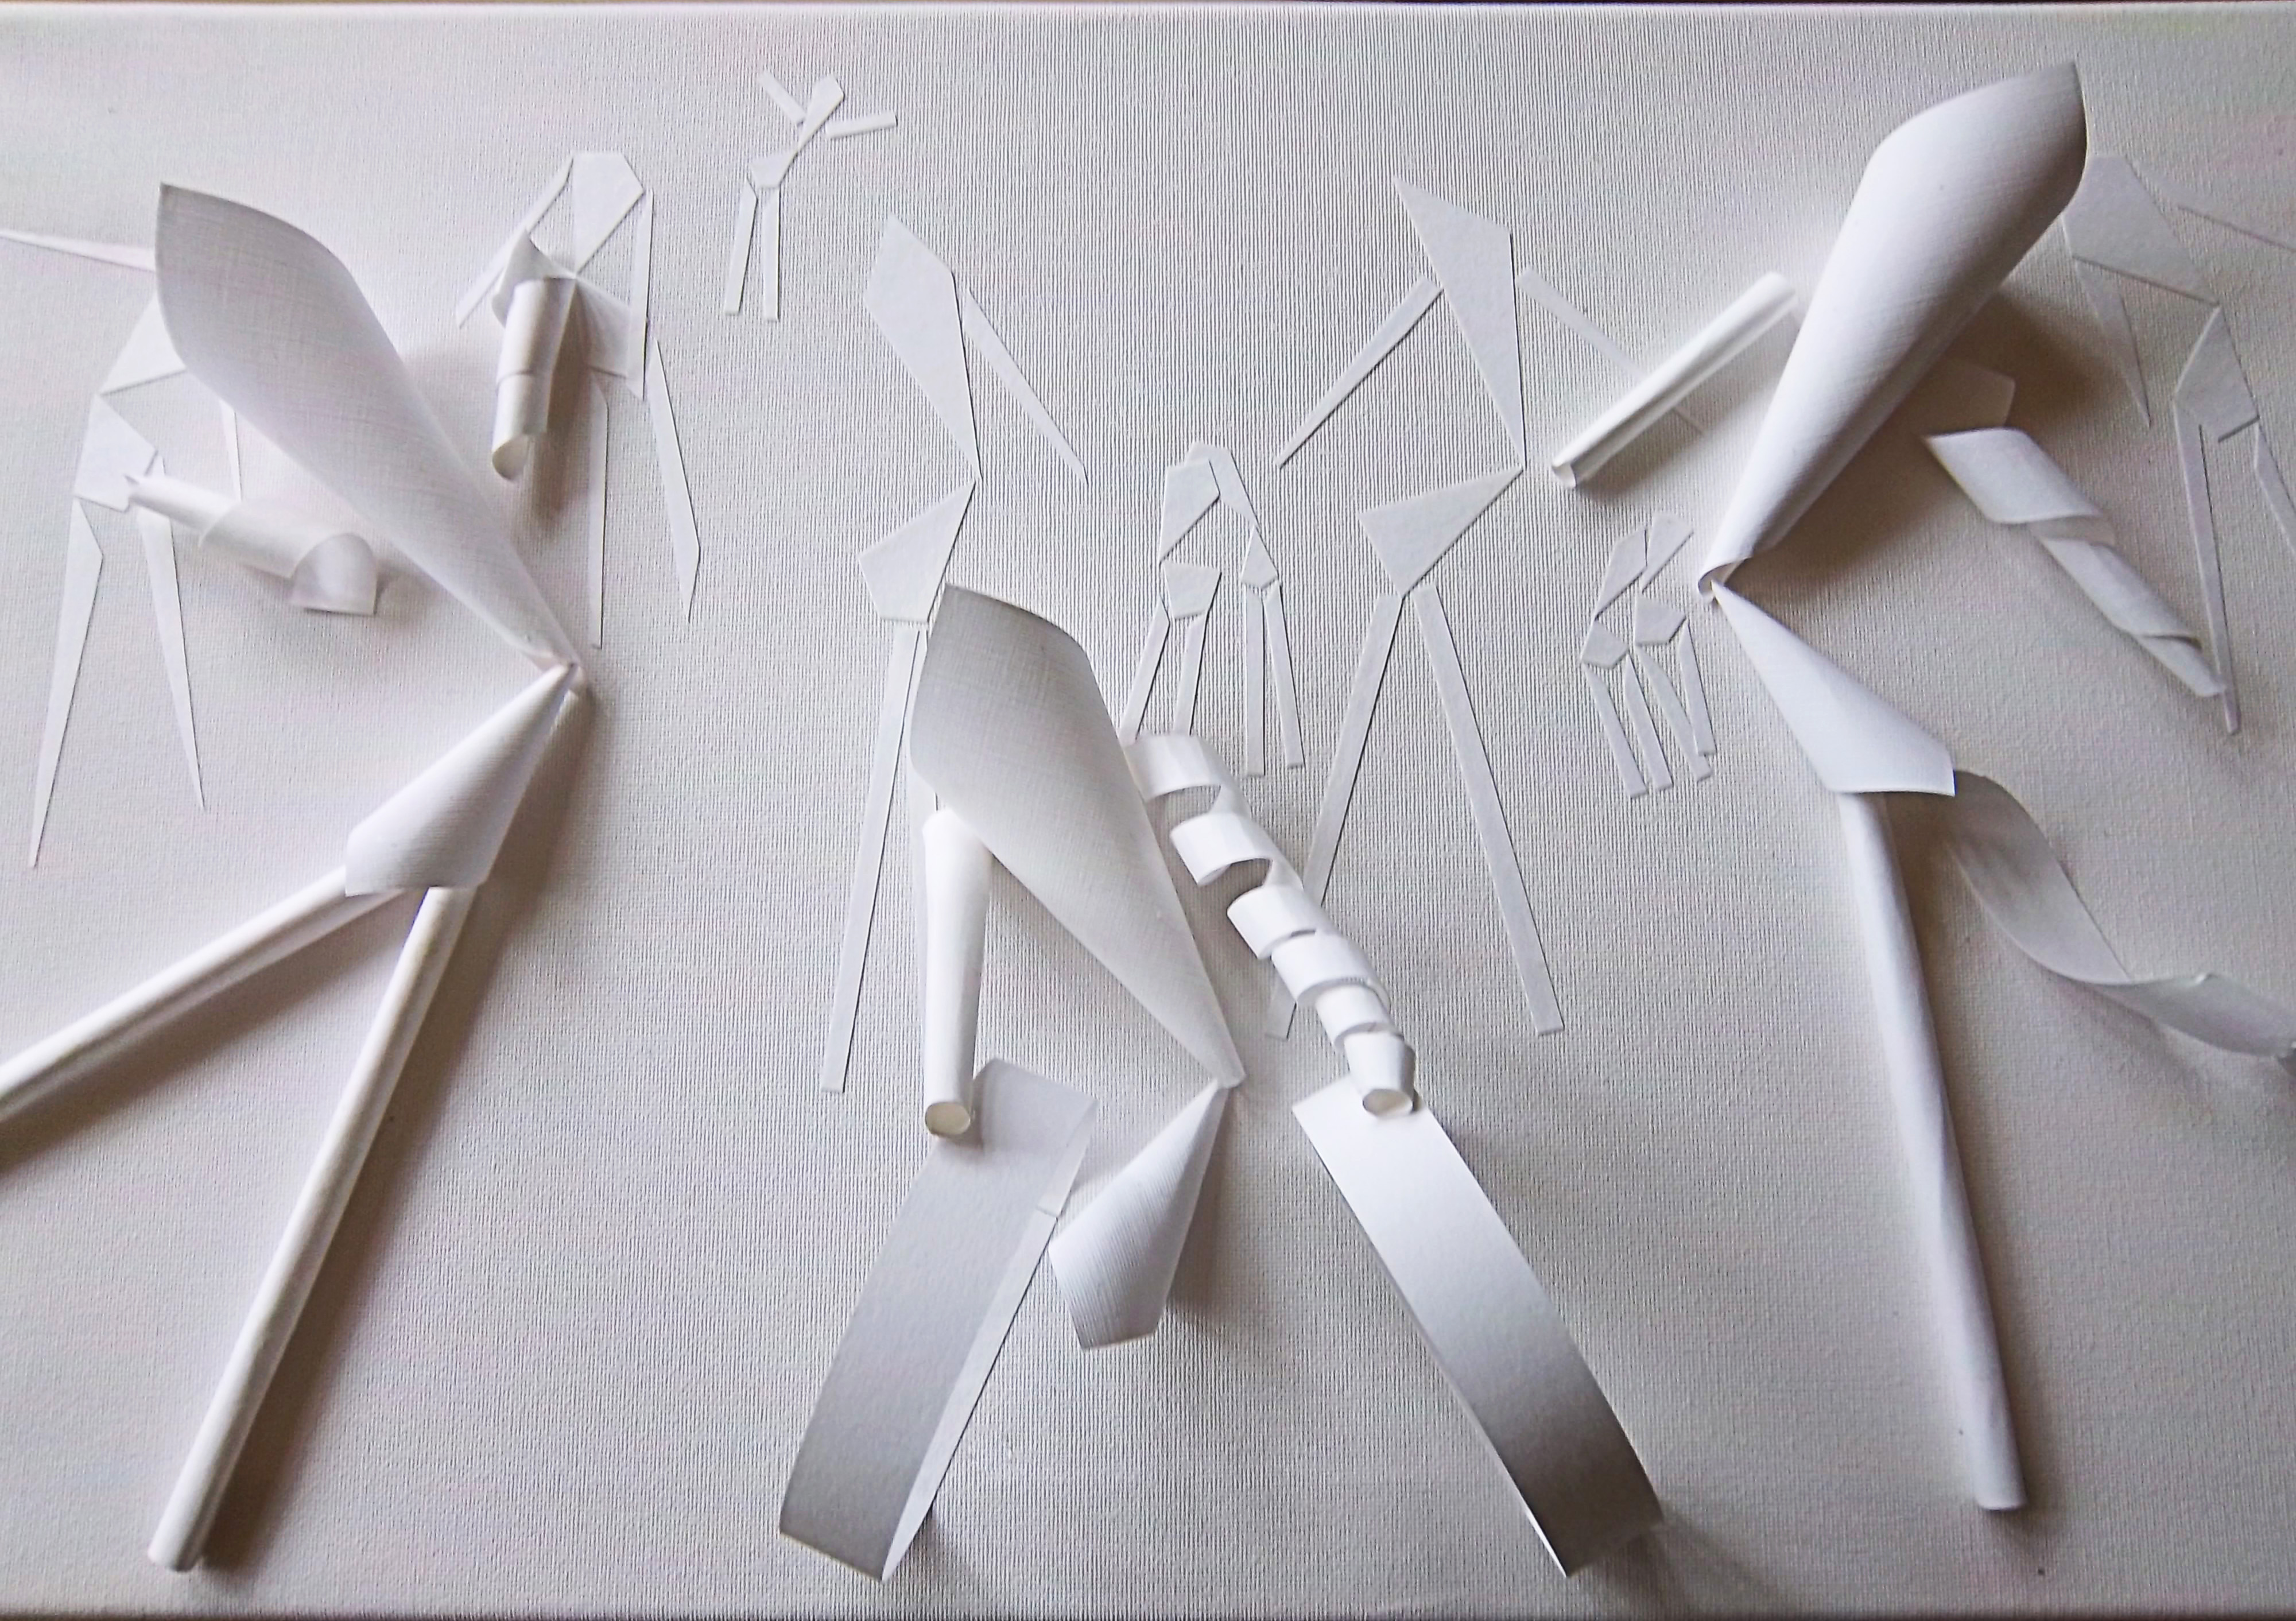 white on white flat, and 3D paper representaions of diversity, fx limbless and wheelborne people